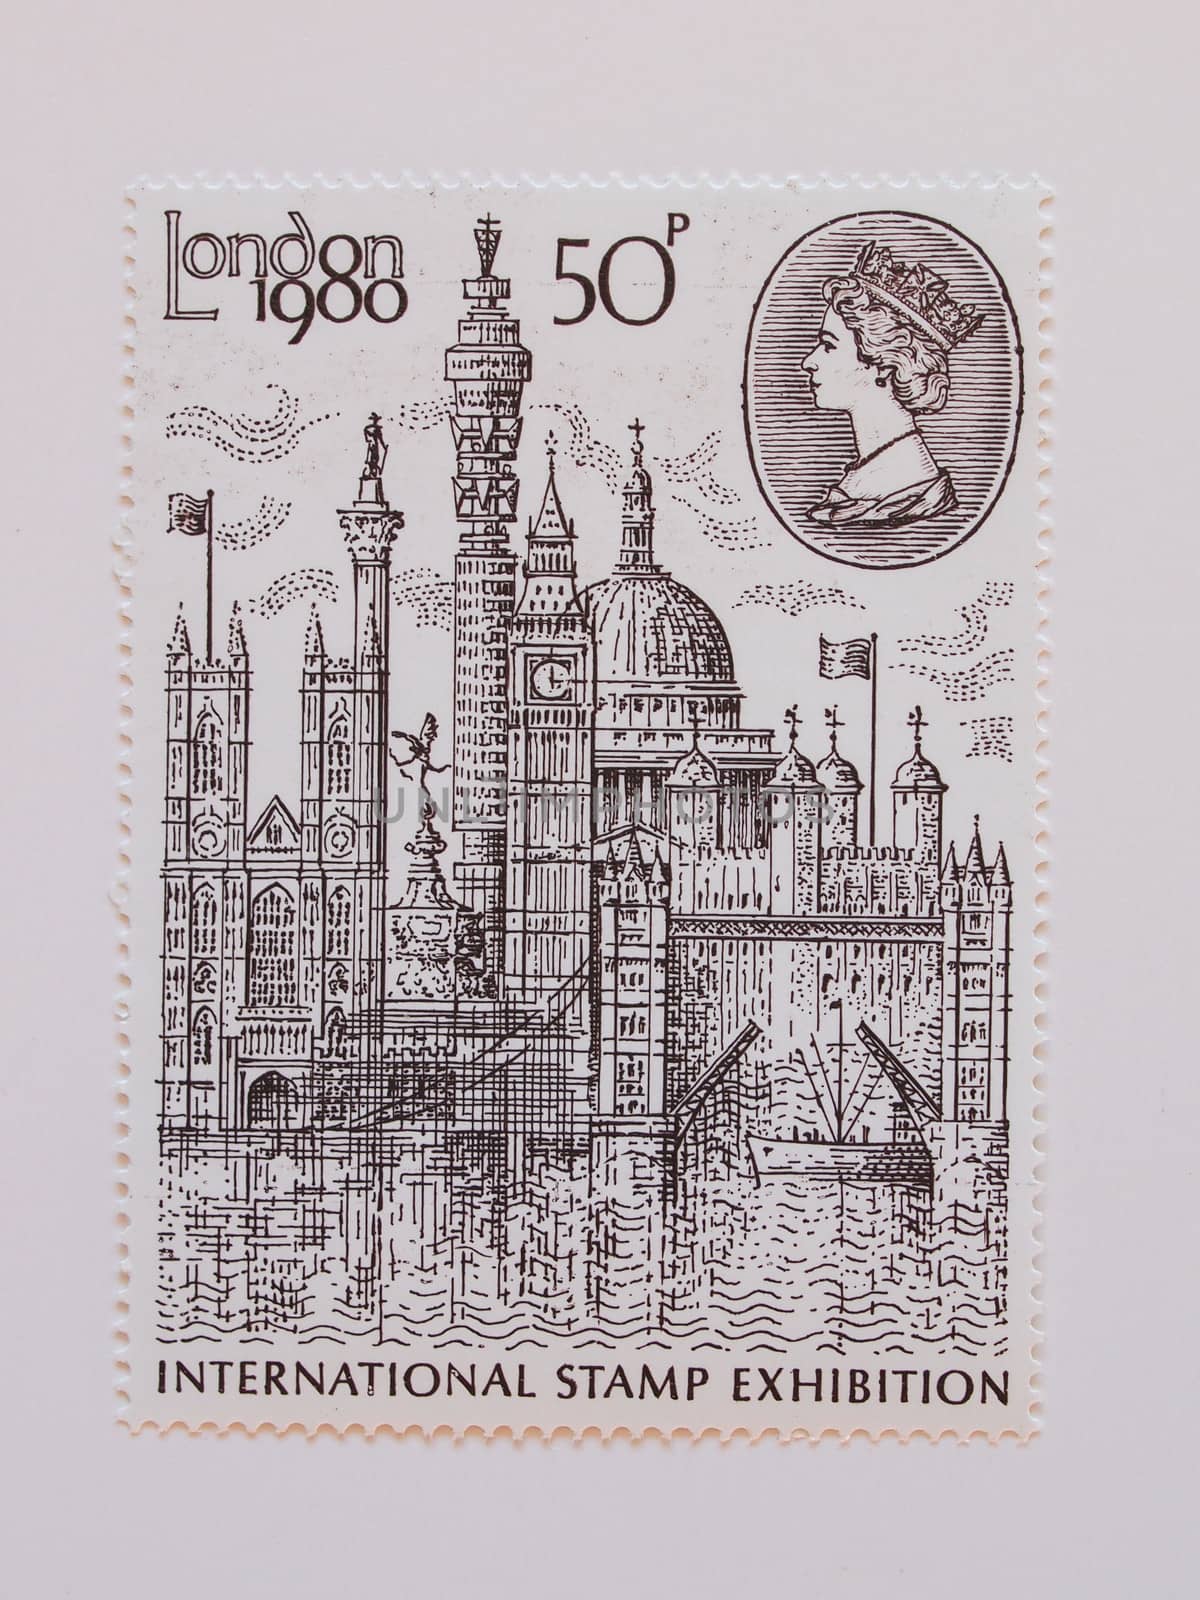 UK, CIRCA 1977 - mail stamp to celebrate the landmarks of London, released in the UK in 1977